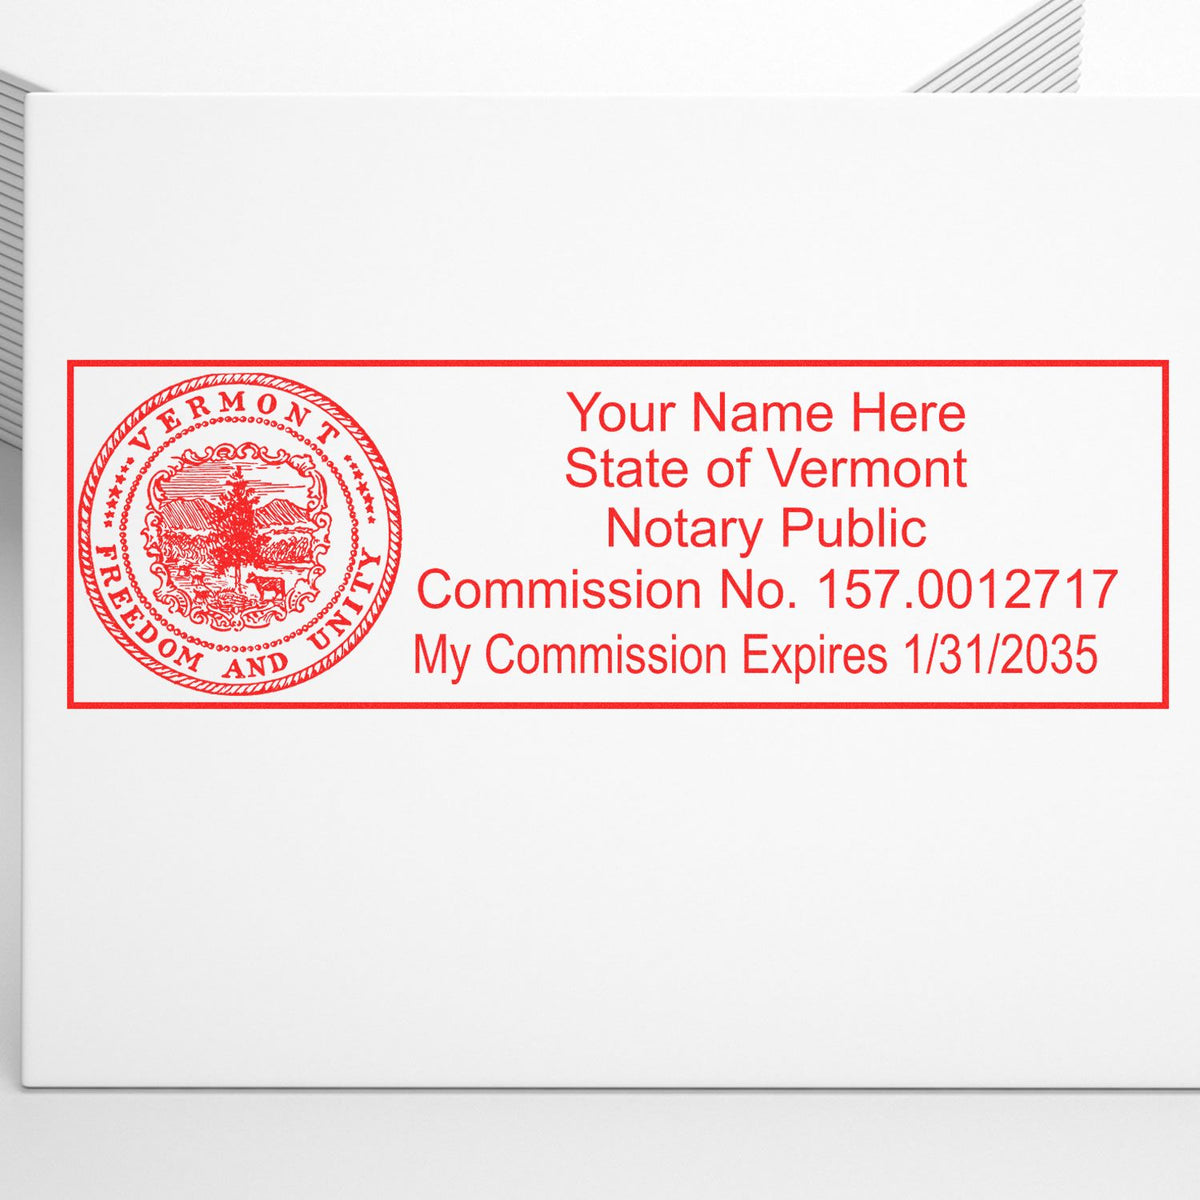 The Heavy-Duty Vermont Rectangular Notary Stamp stamp impression comes to life with a crisp, detailed photo on paper - showcasing true professional quality.